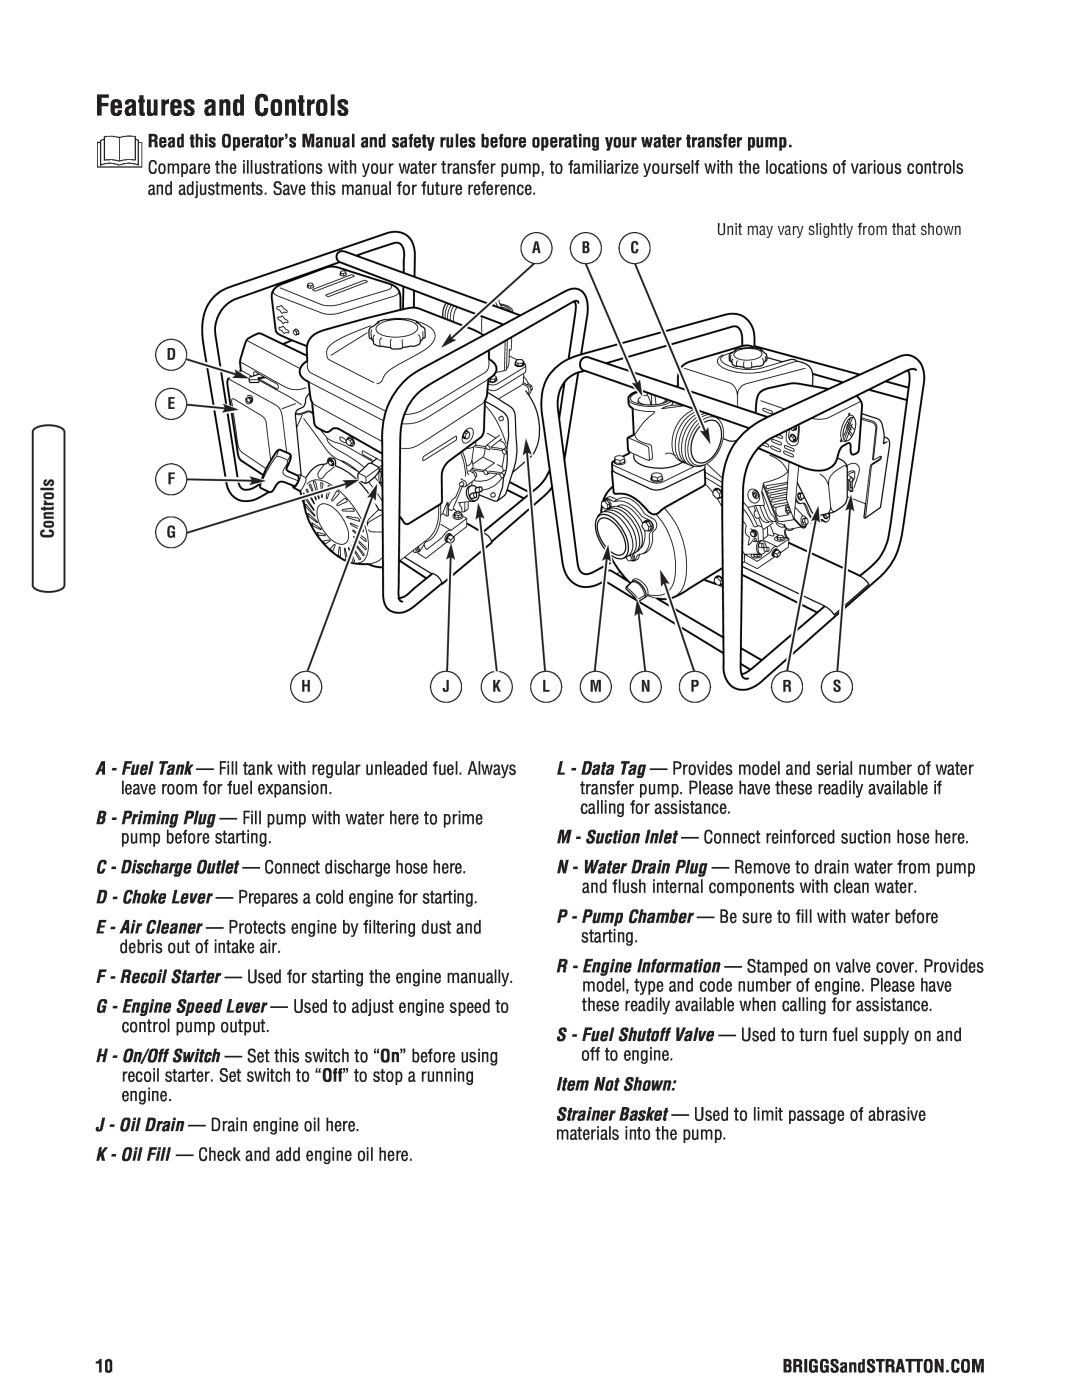 Briggs & Stratton Water Transfer Pump manual Features and Controls, Item Not Shown 